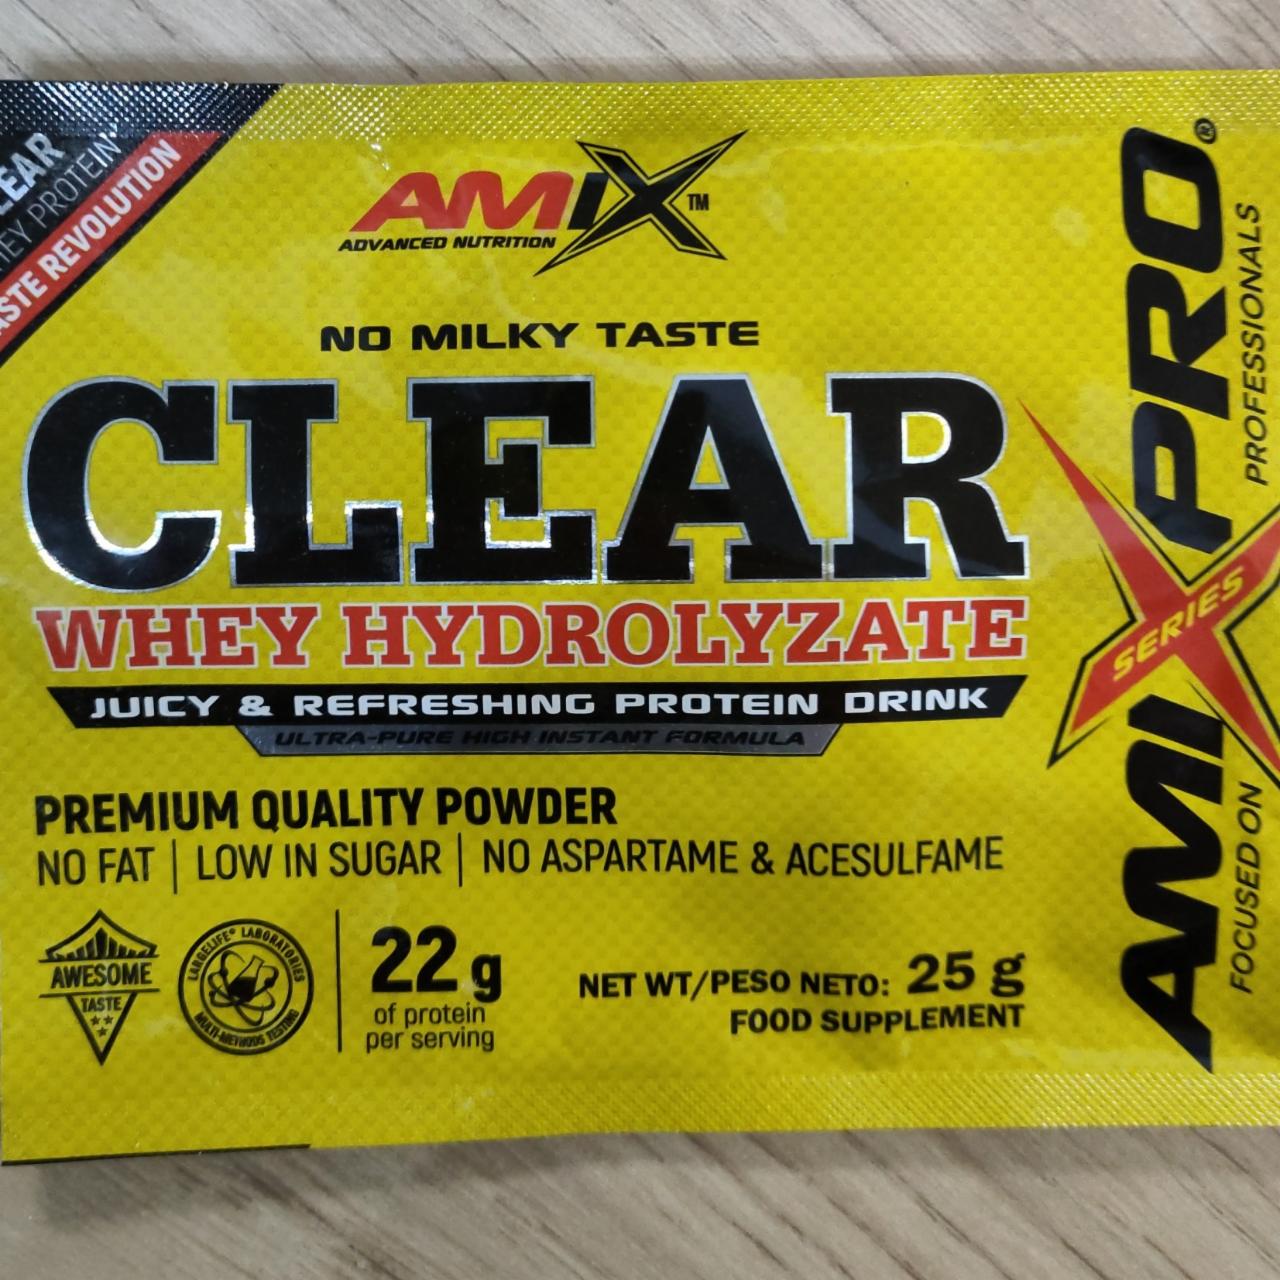 Фото - Clearly whey hydrolyzate Amix